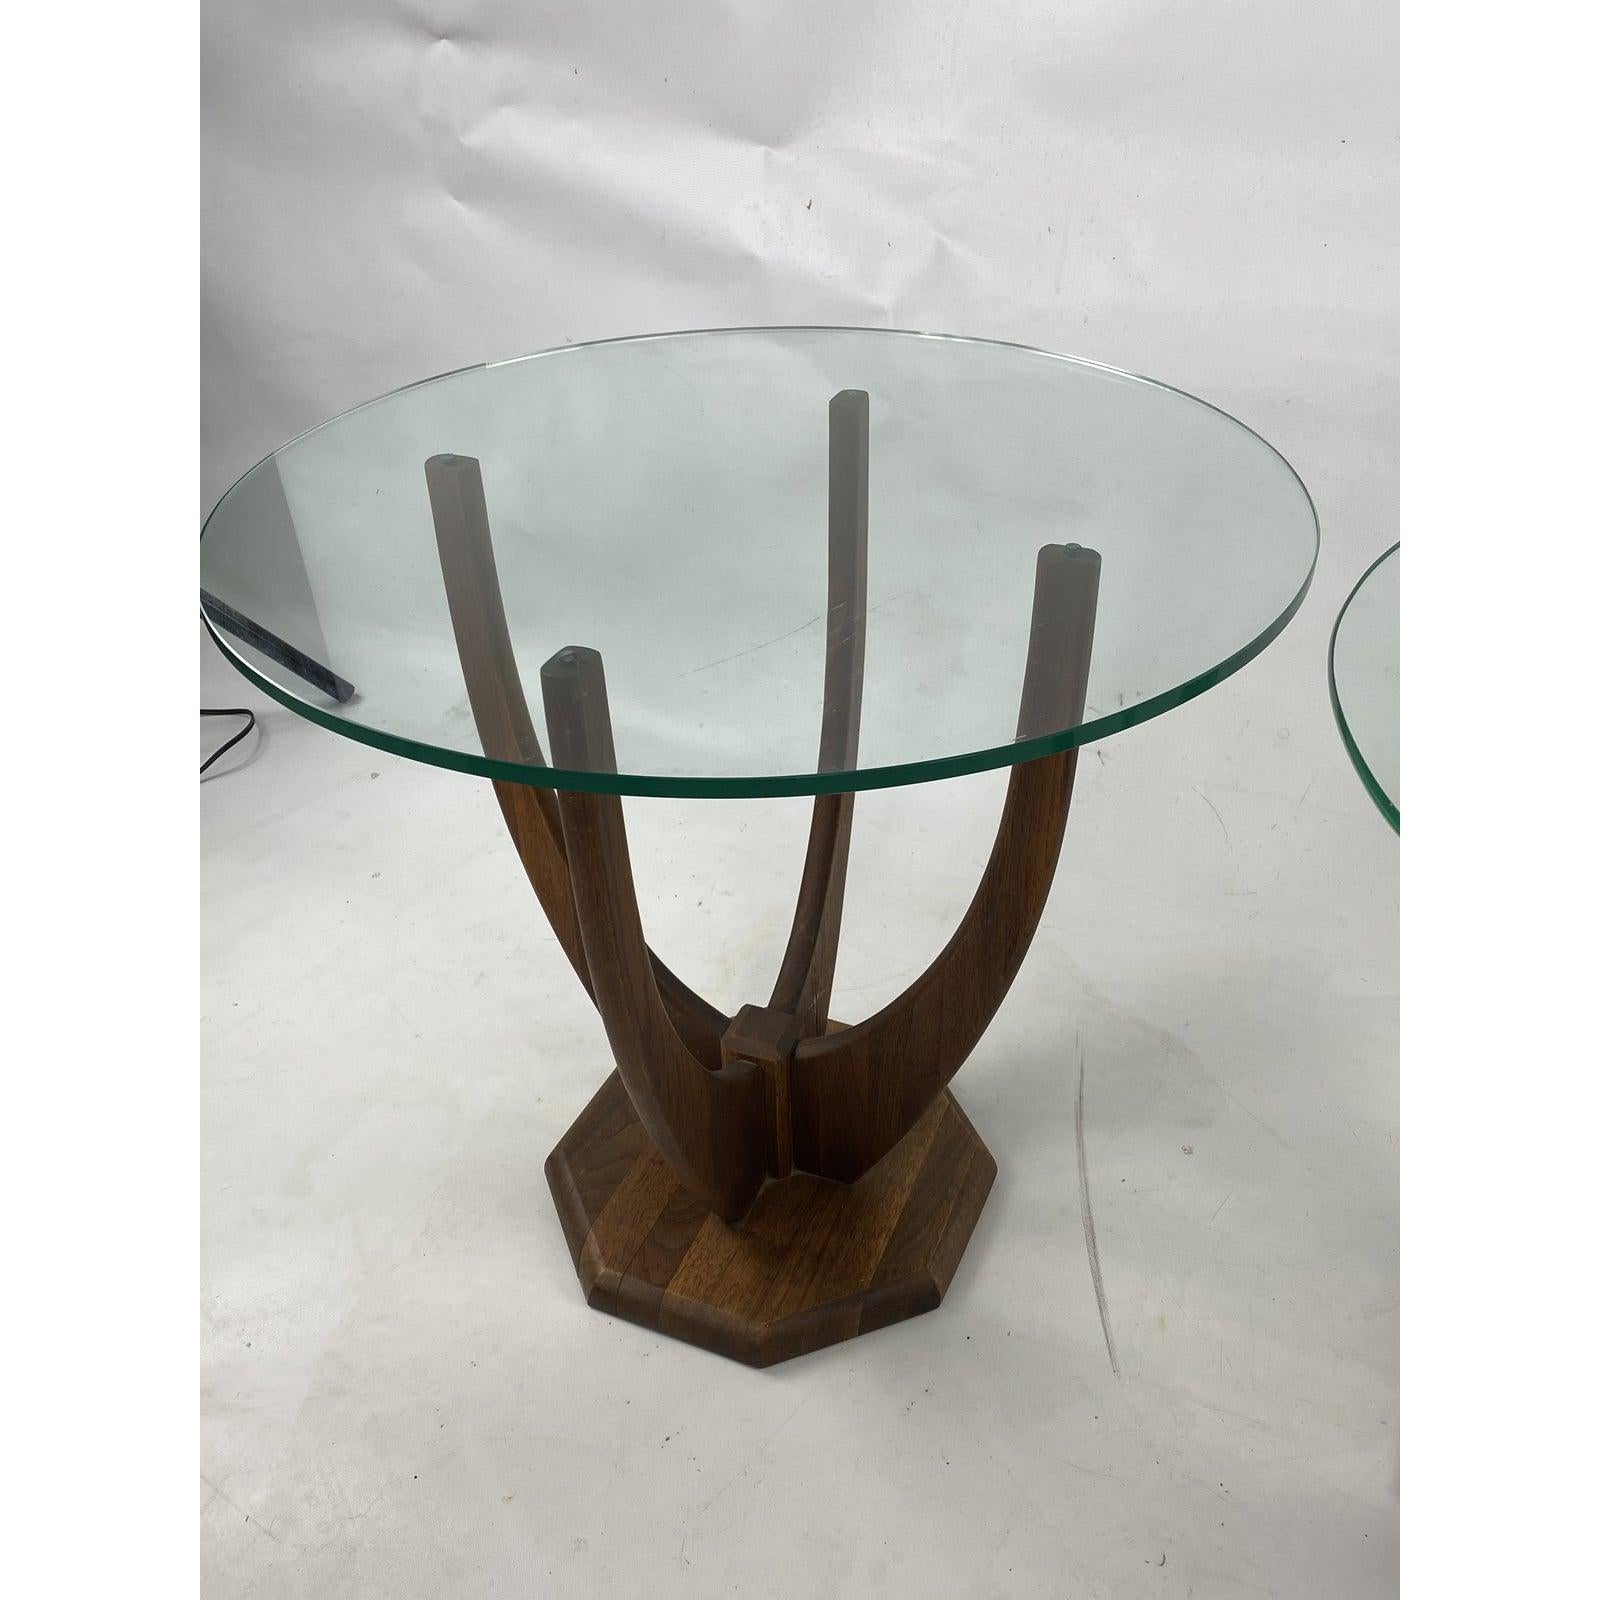 American Mid-Century Adrian Pearsall Style Sculptural Walnut Side Tables, a Pair